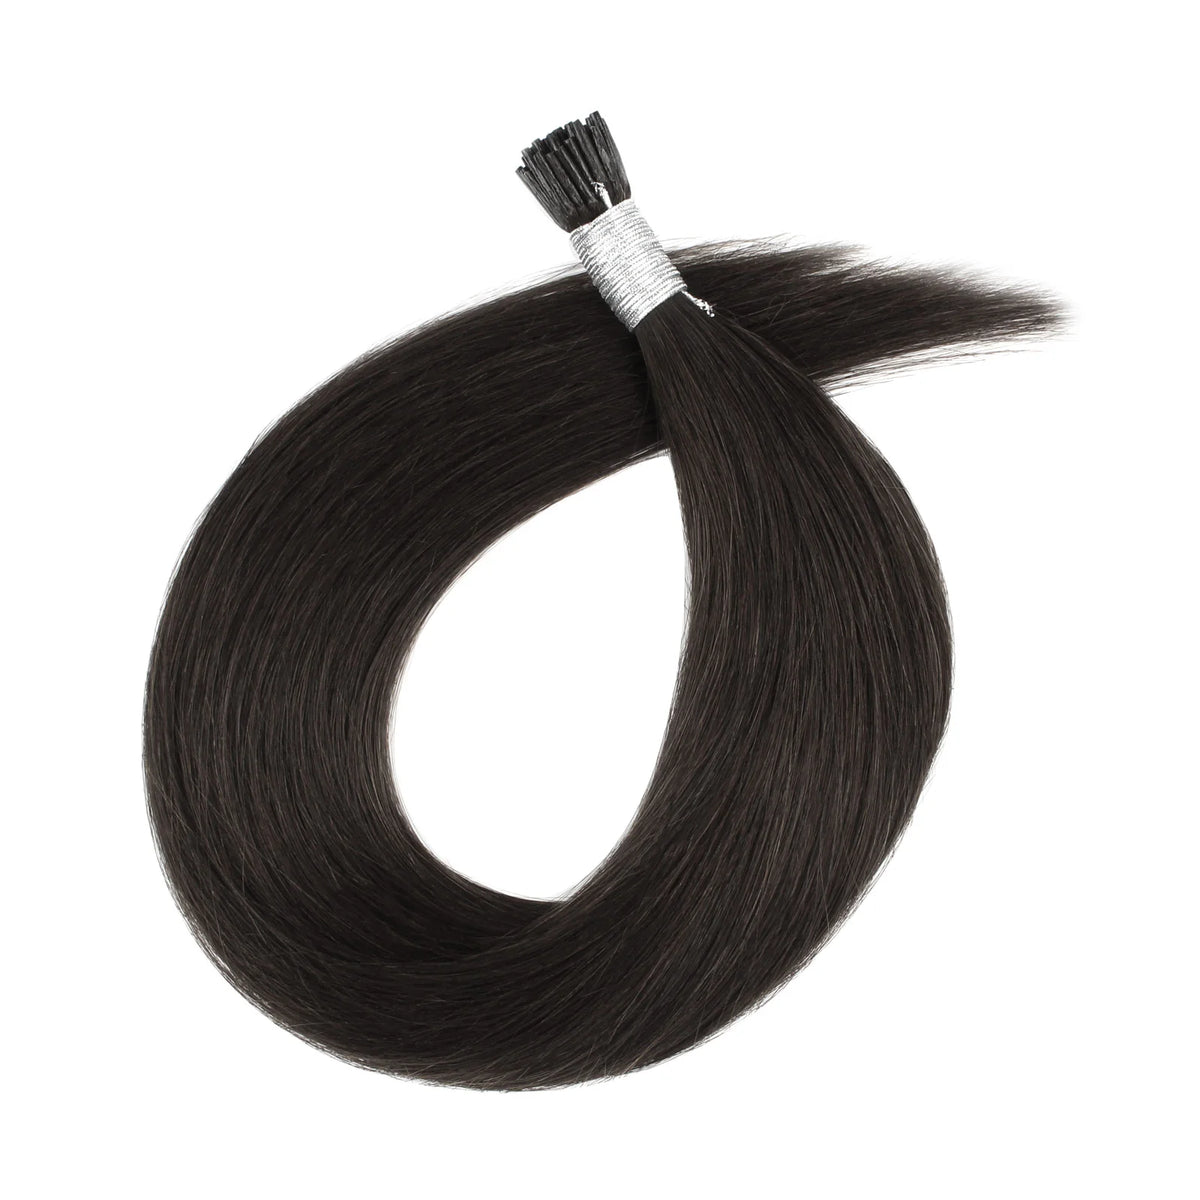 I-tip Hair Extension Raw Virgin Hair Straight 18-26inch Dark and Light Color 100grams